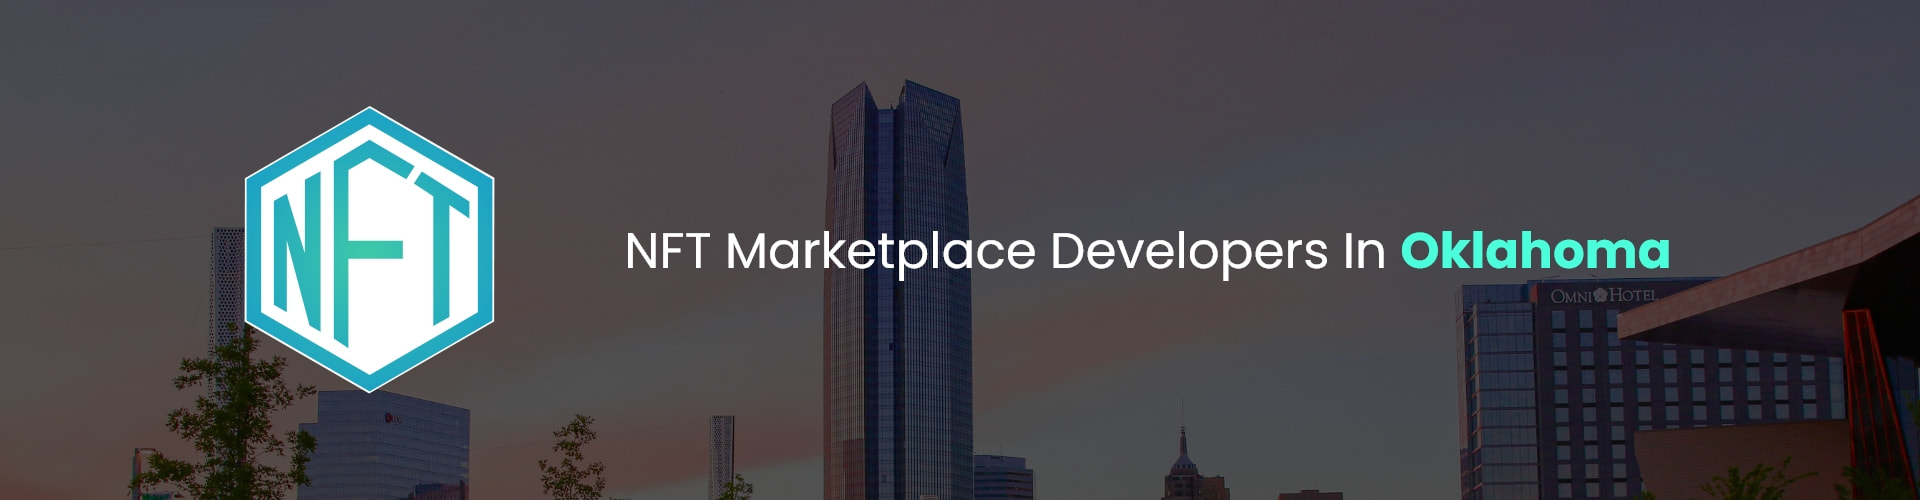 hire nft marketplace developers in oklahoma